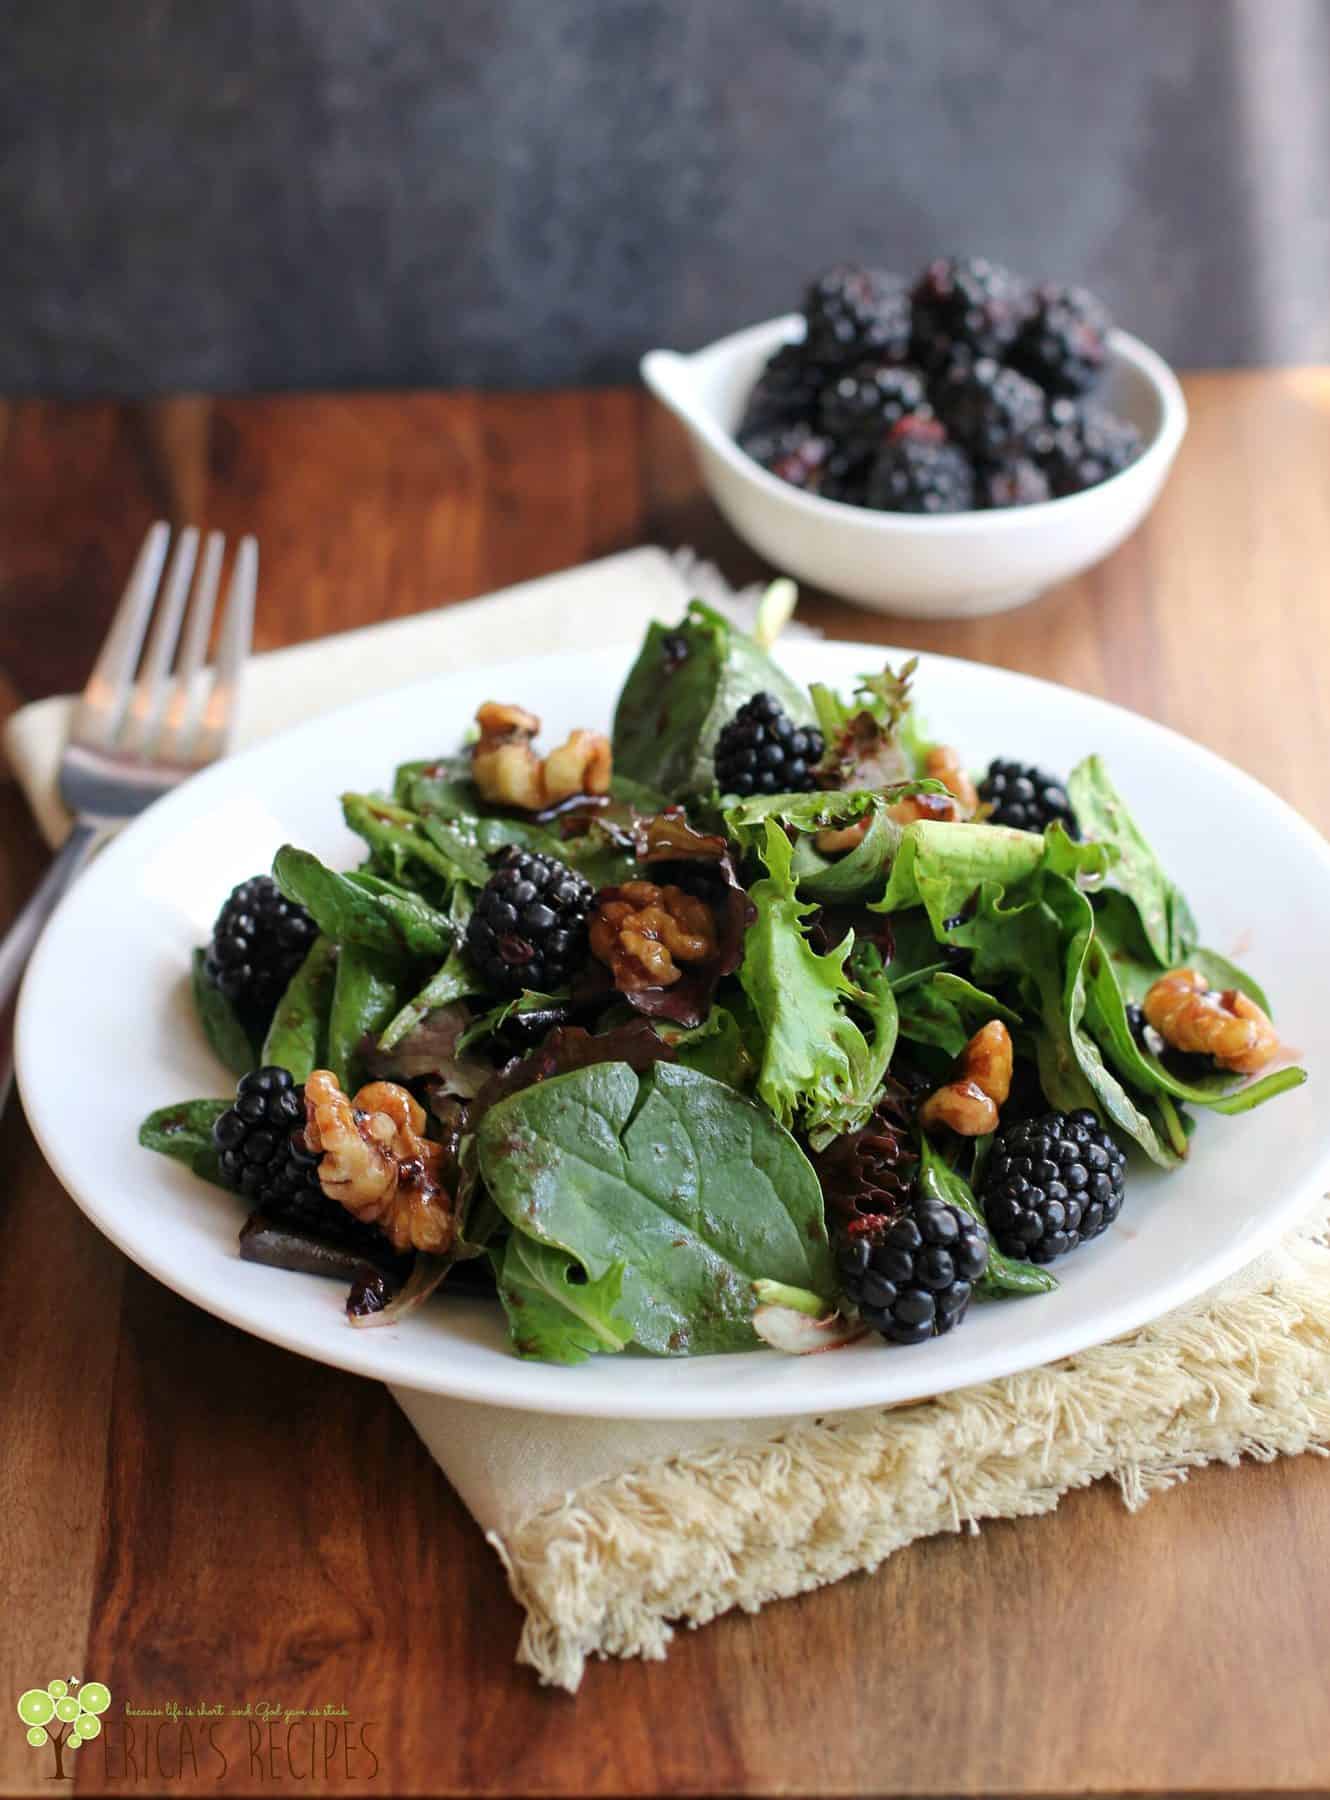 A dark green salad with nuts and blackberries scattered through and a small white dish of fresh blackberries in the background.